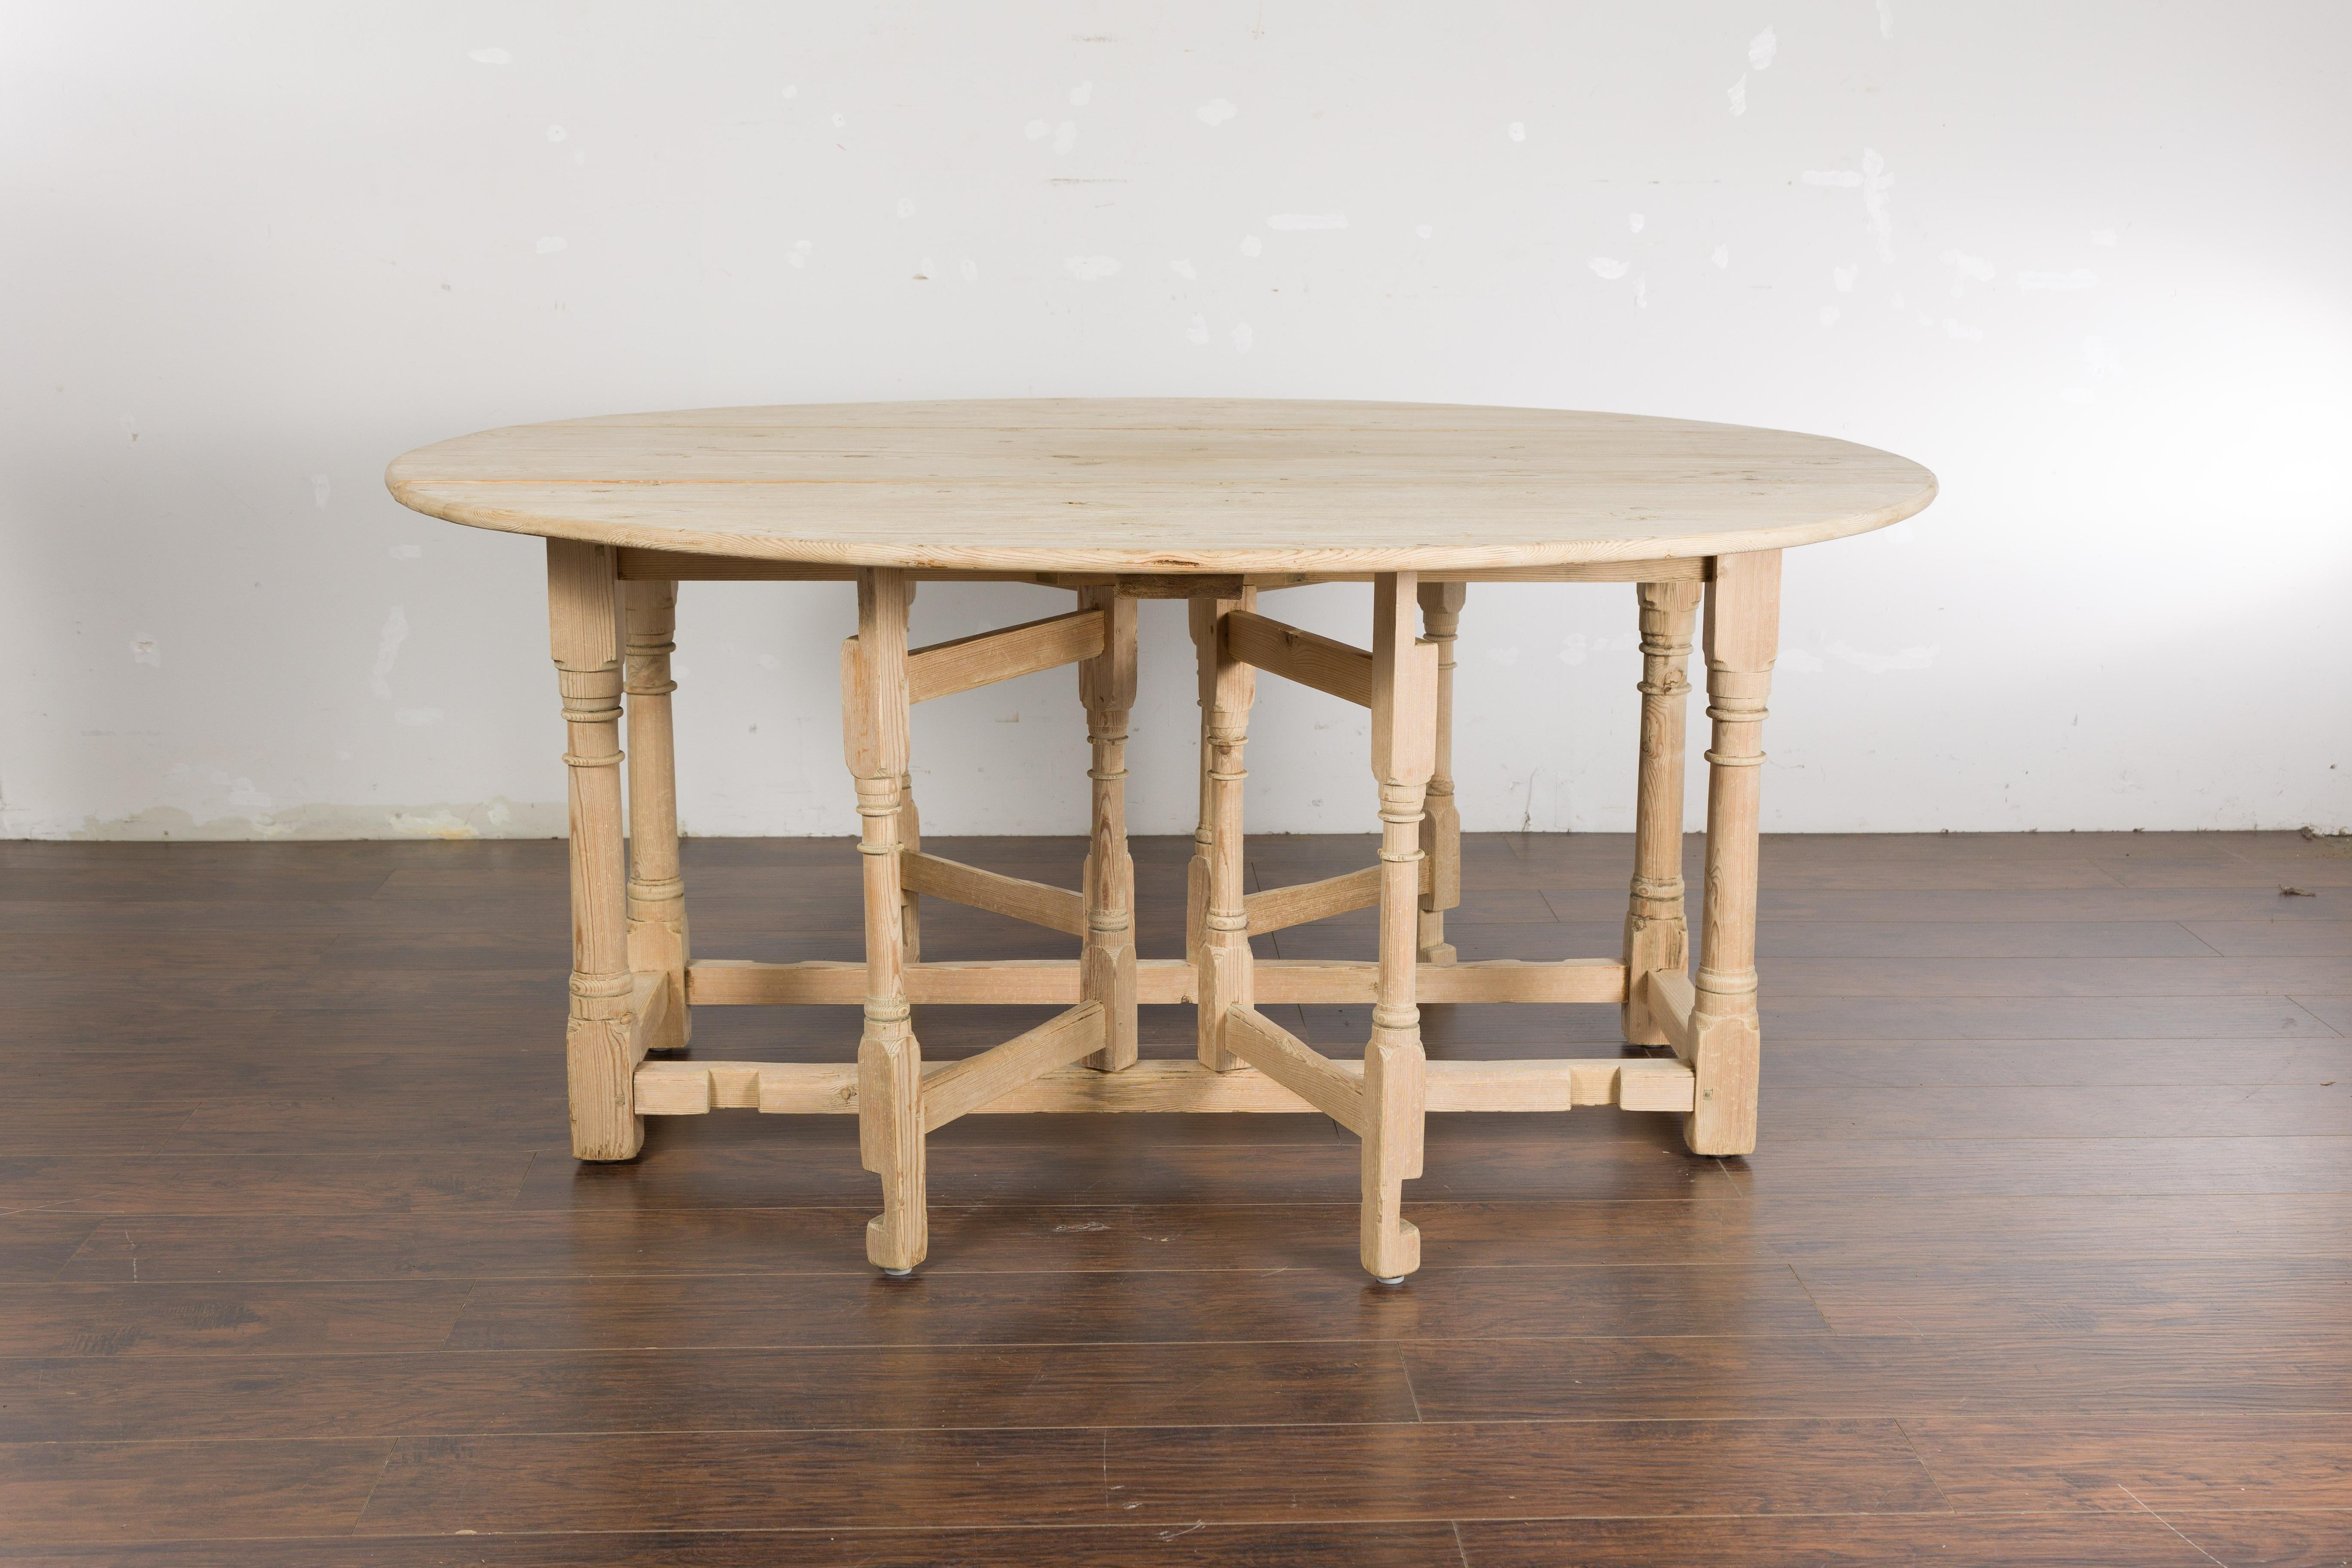 Rustic English 19th Century Pine Drop Leaf Round Top Table with Turned Legs For Sale 4